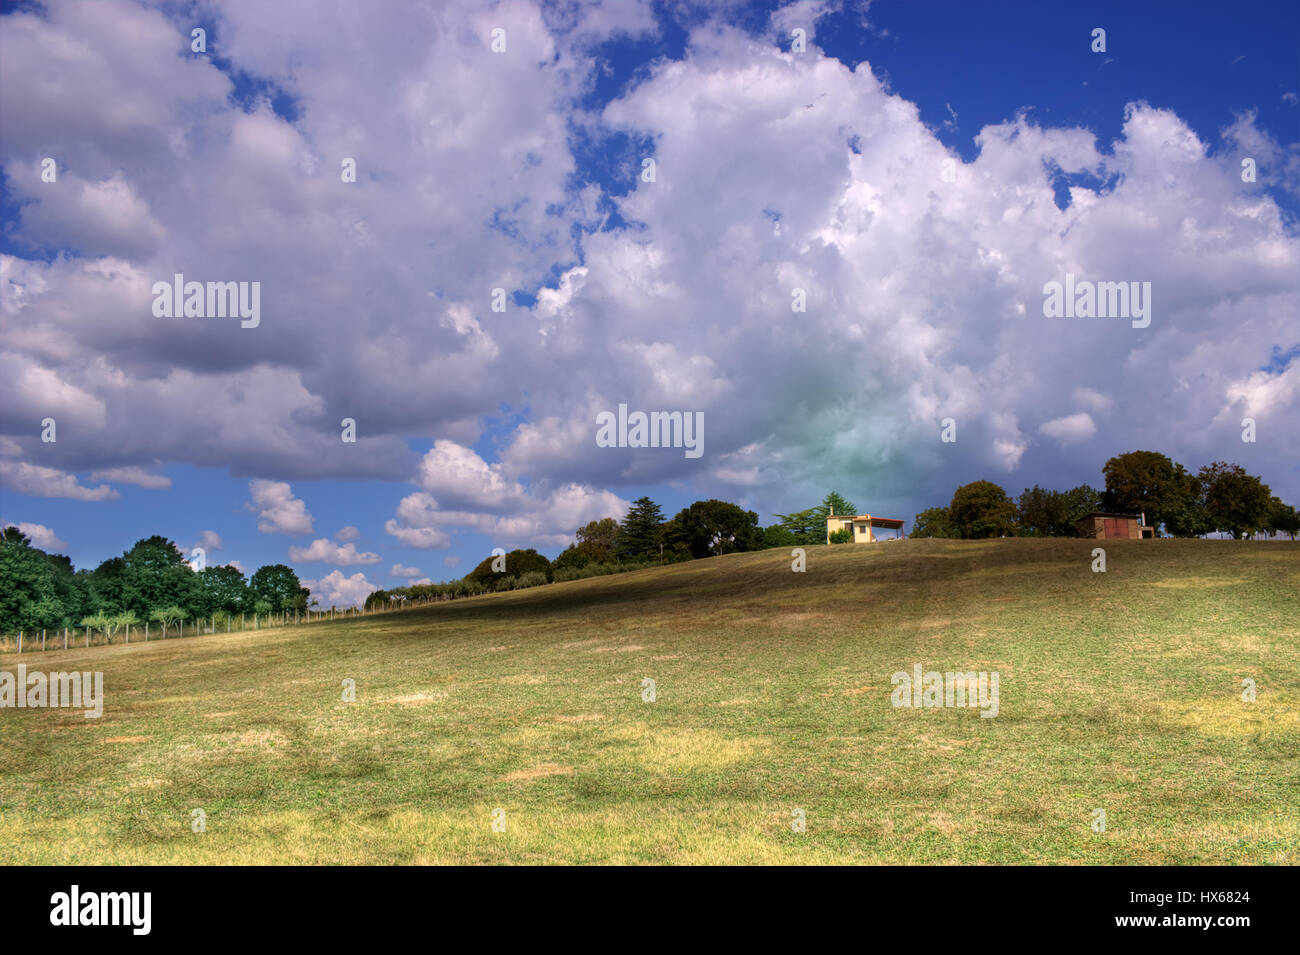 A country scene and a farmhouse in a cloudy day Stock Photo